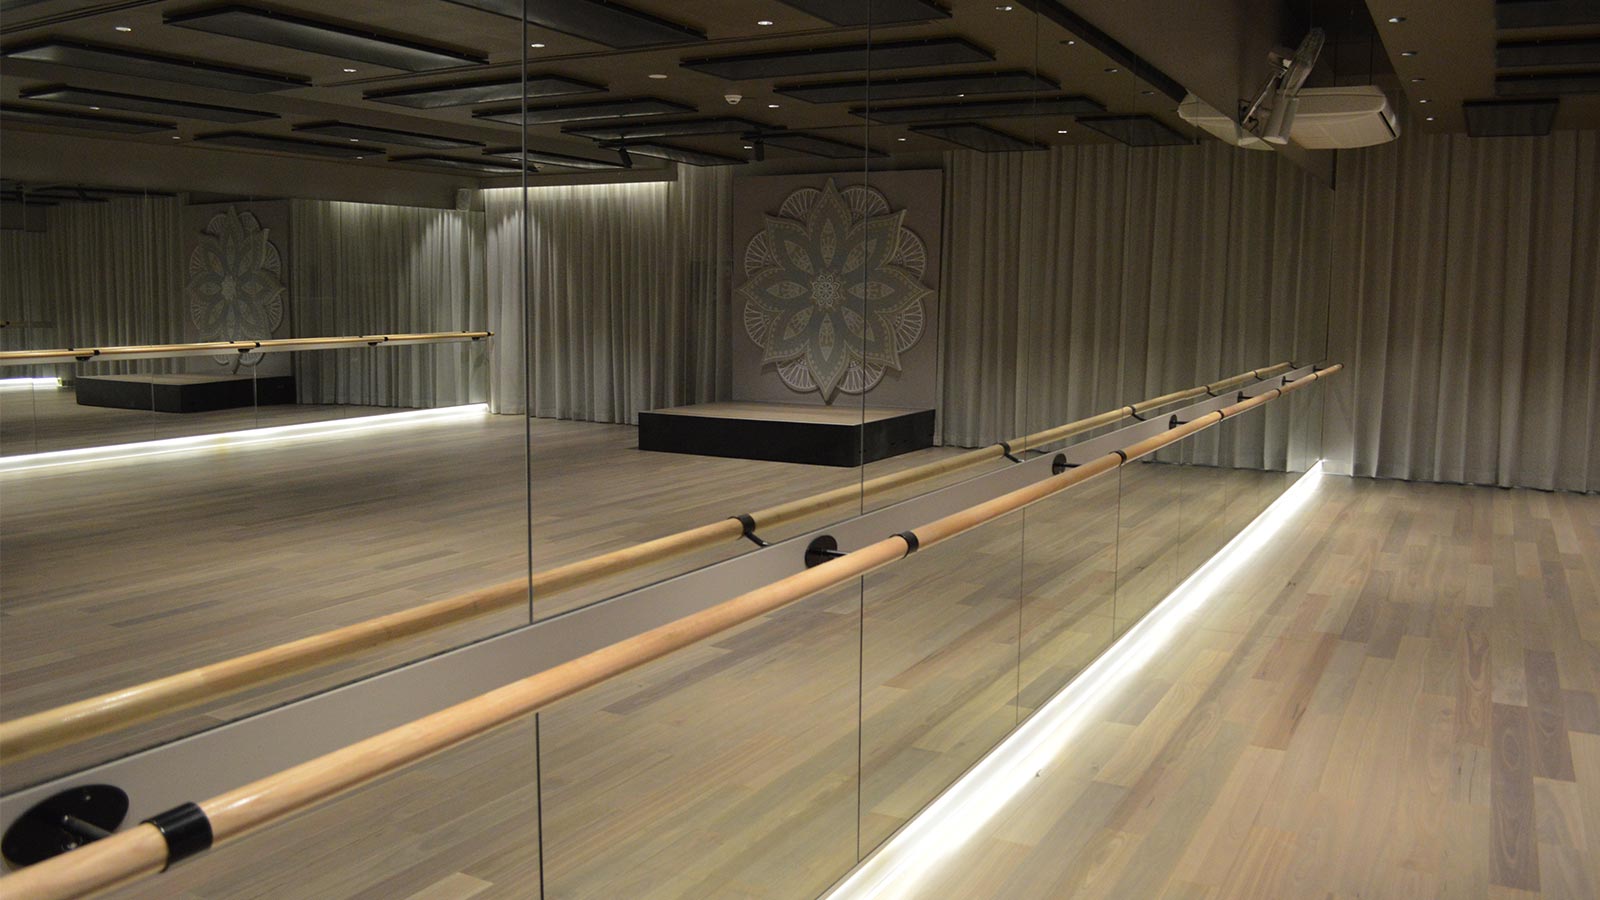 The barre against themirrors with mandala in the background